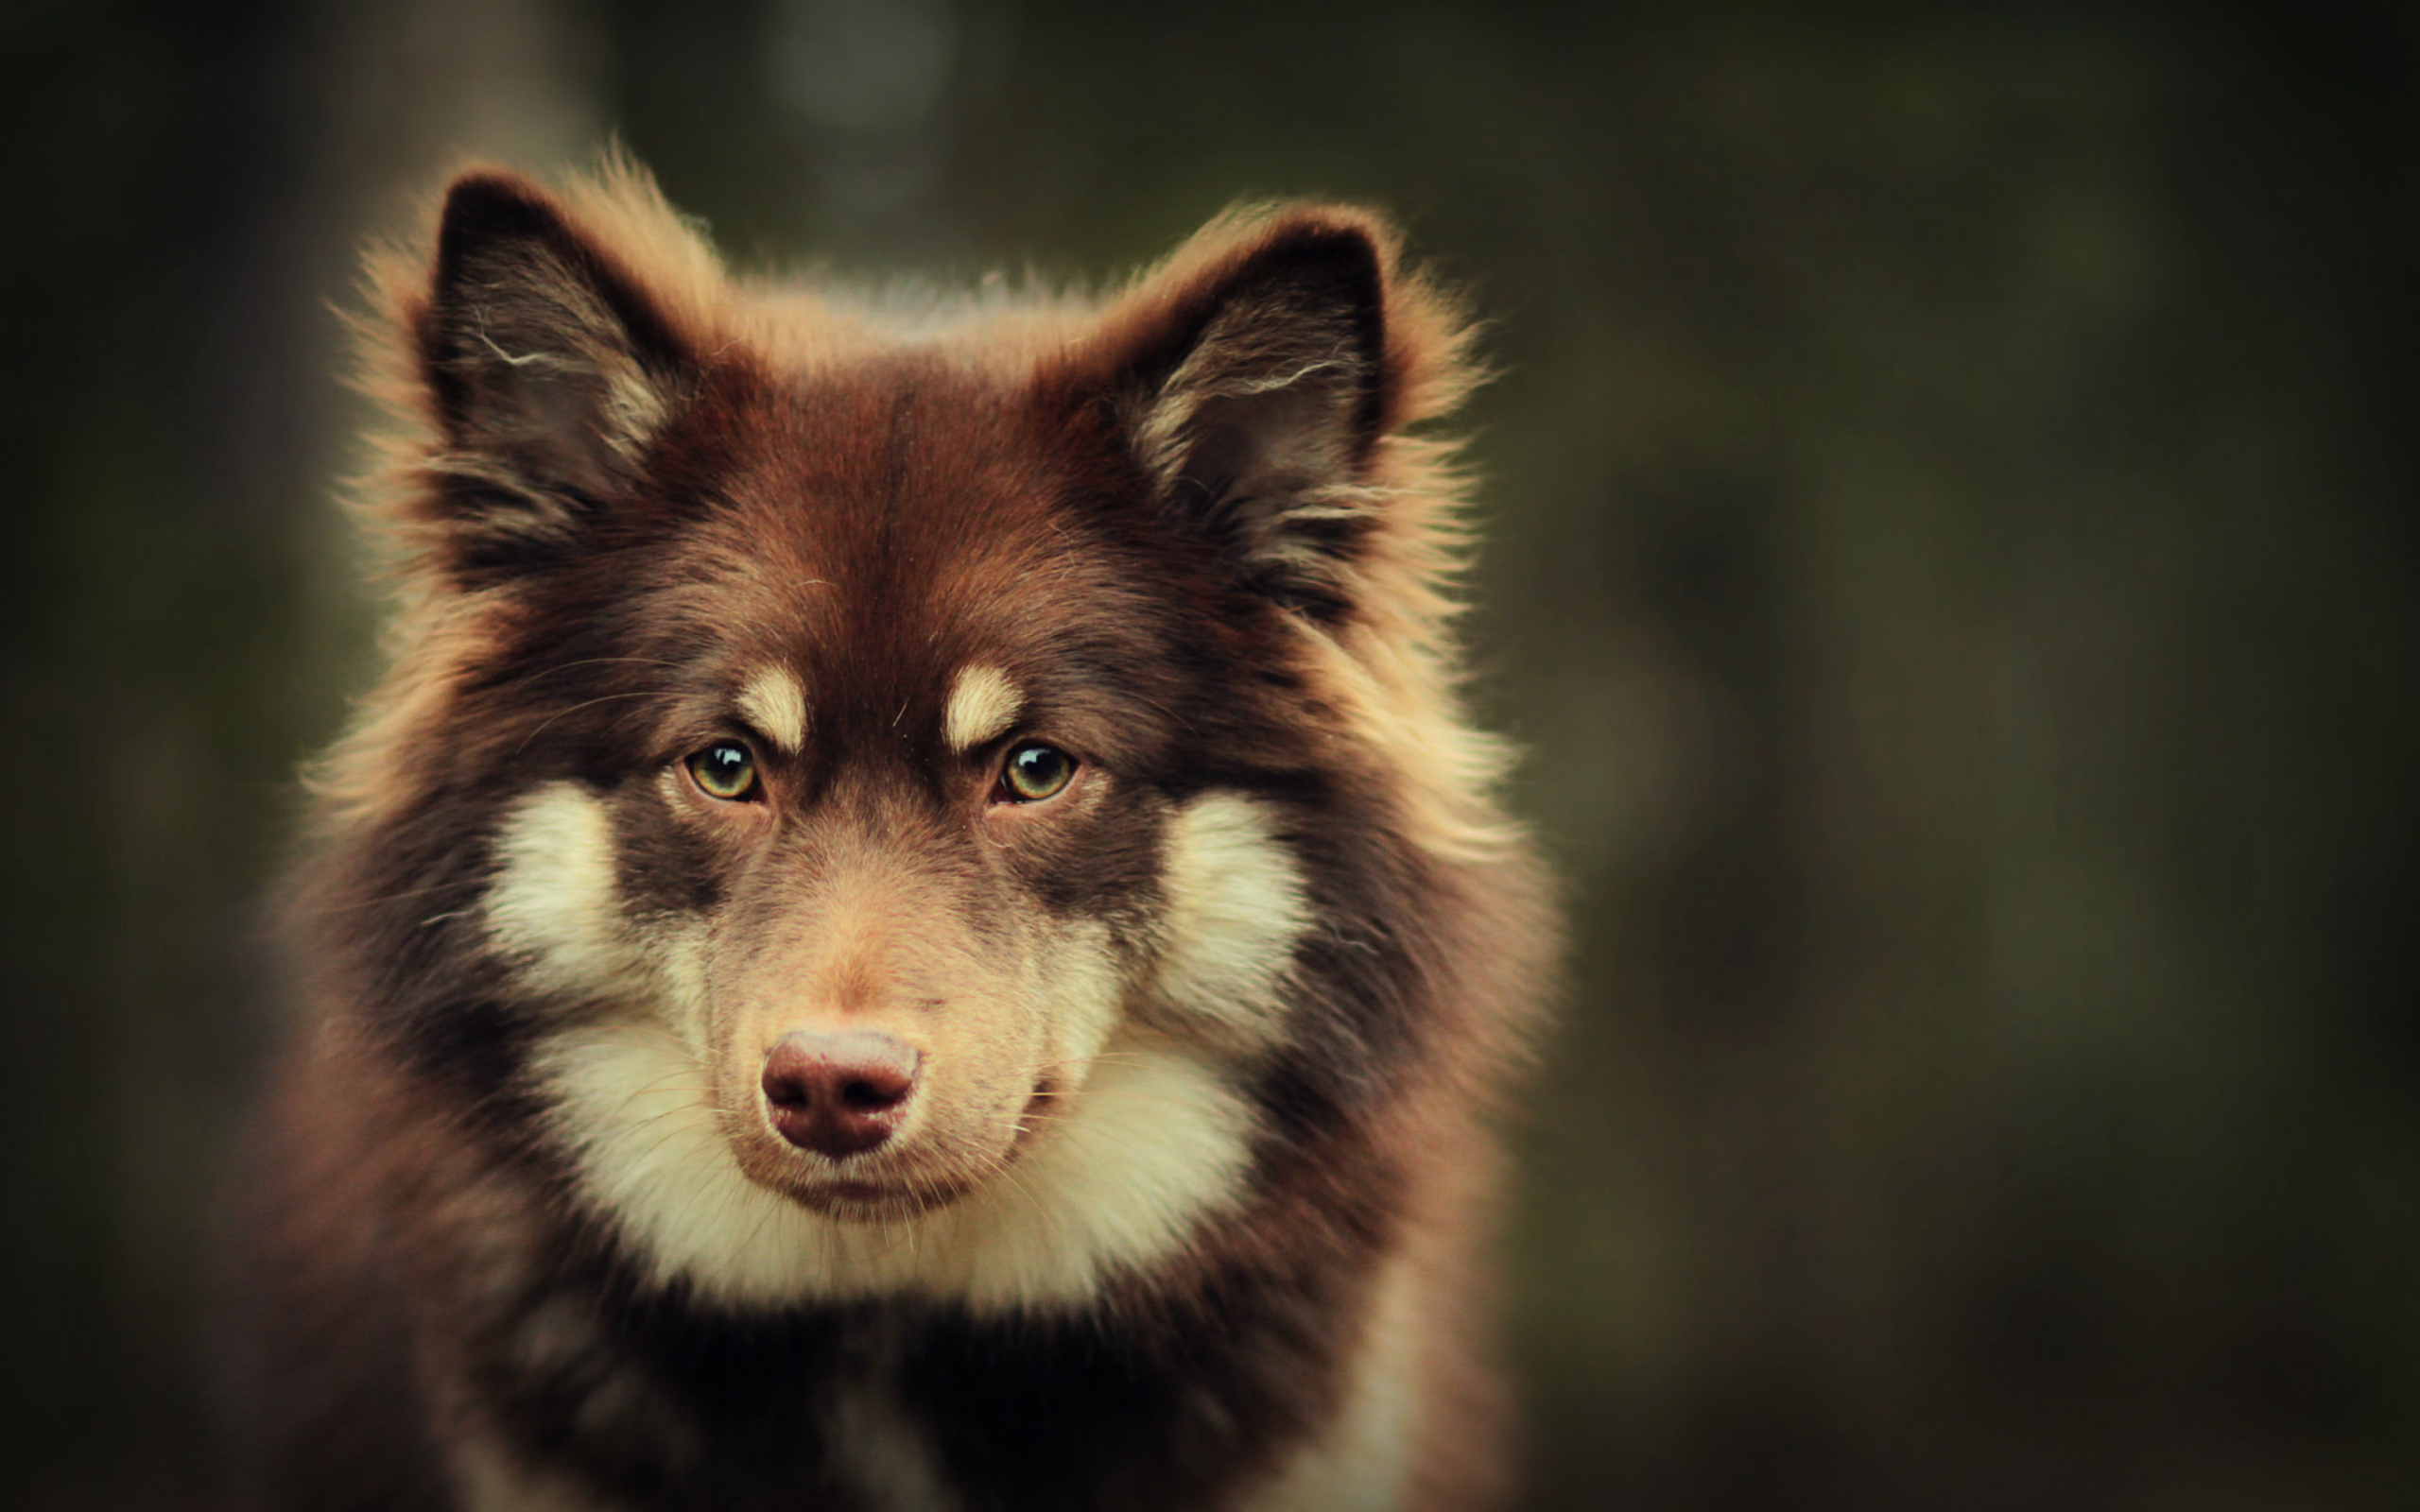 Dog With Smart Eyes wallpaper 2560x1600